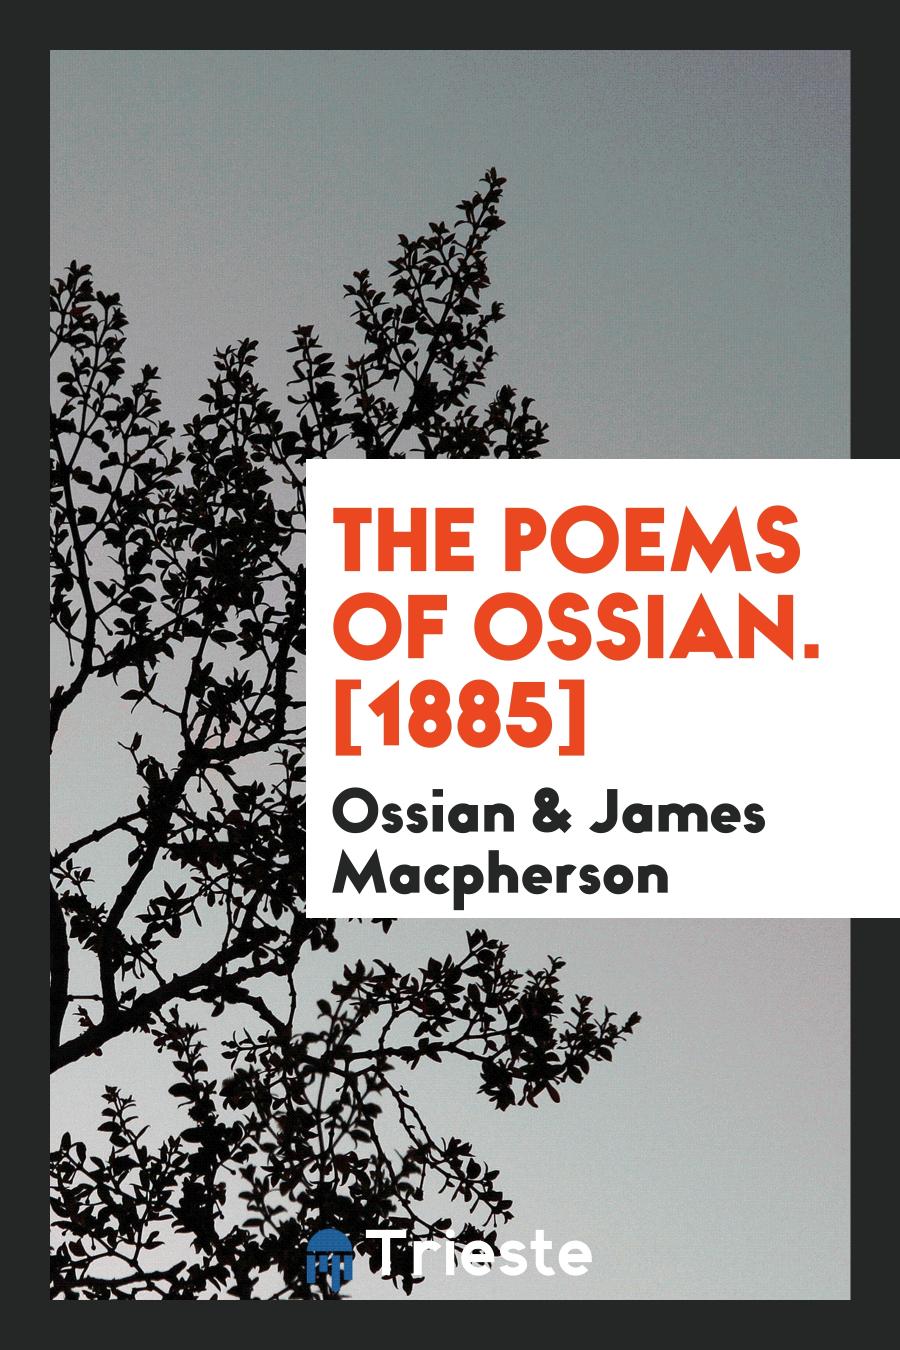 The Poems of Ossian. [1885]